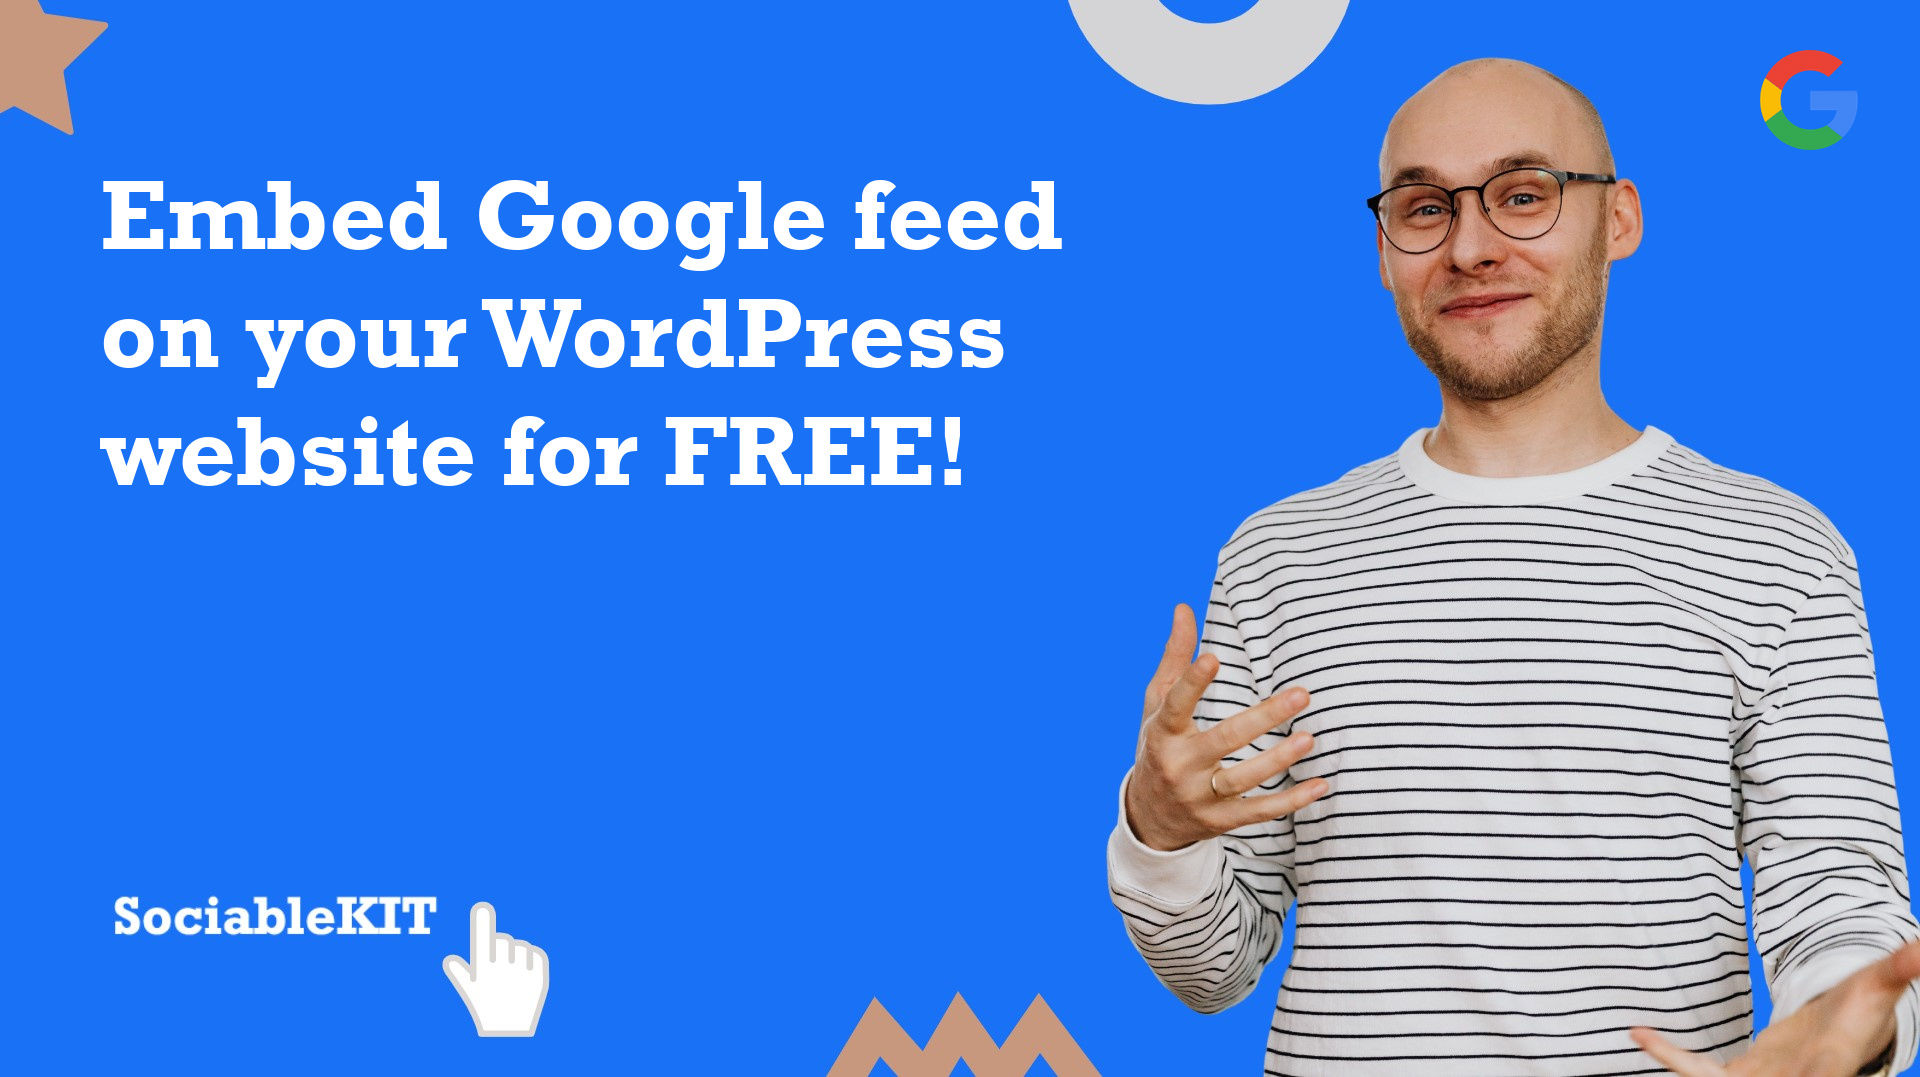 How to embed Google feed on your WordPress website for FREE?